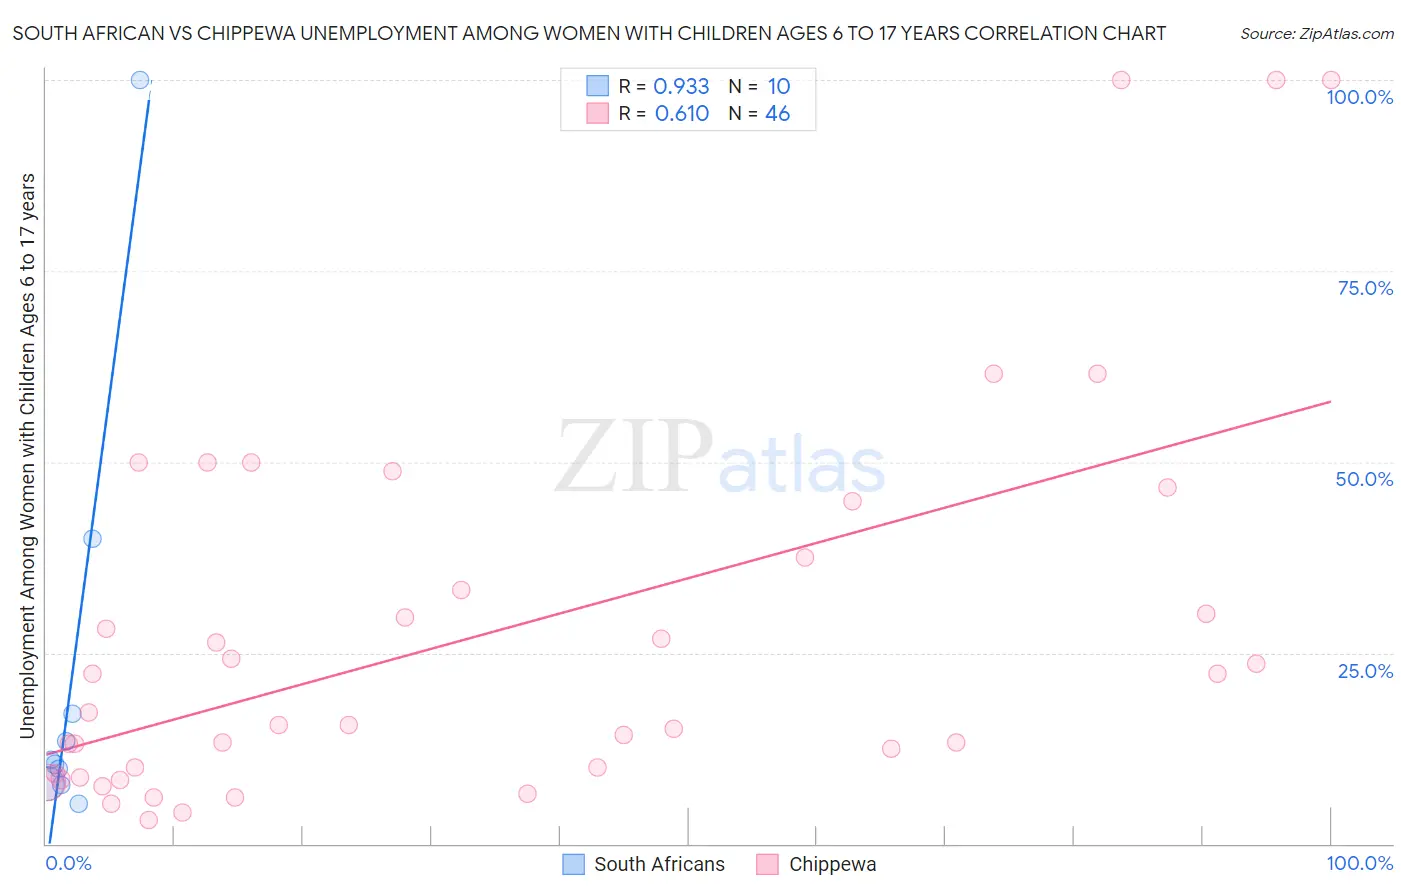 South African vs Chippewa Unemployment Among Women with Children Ages 6 to 17 years